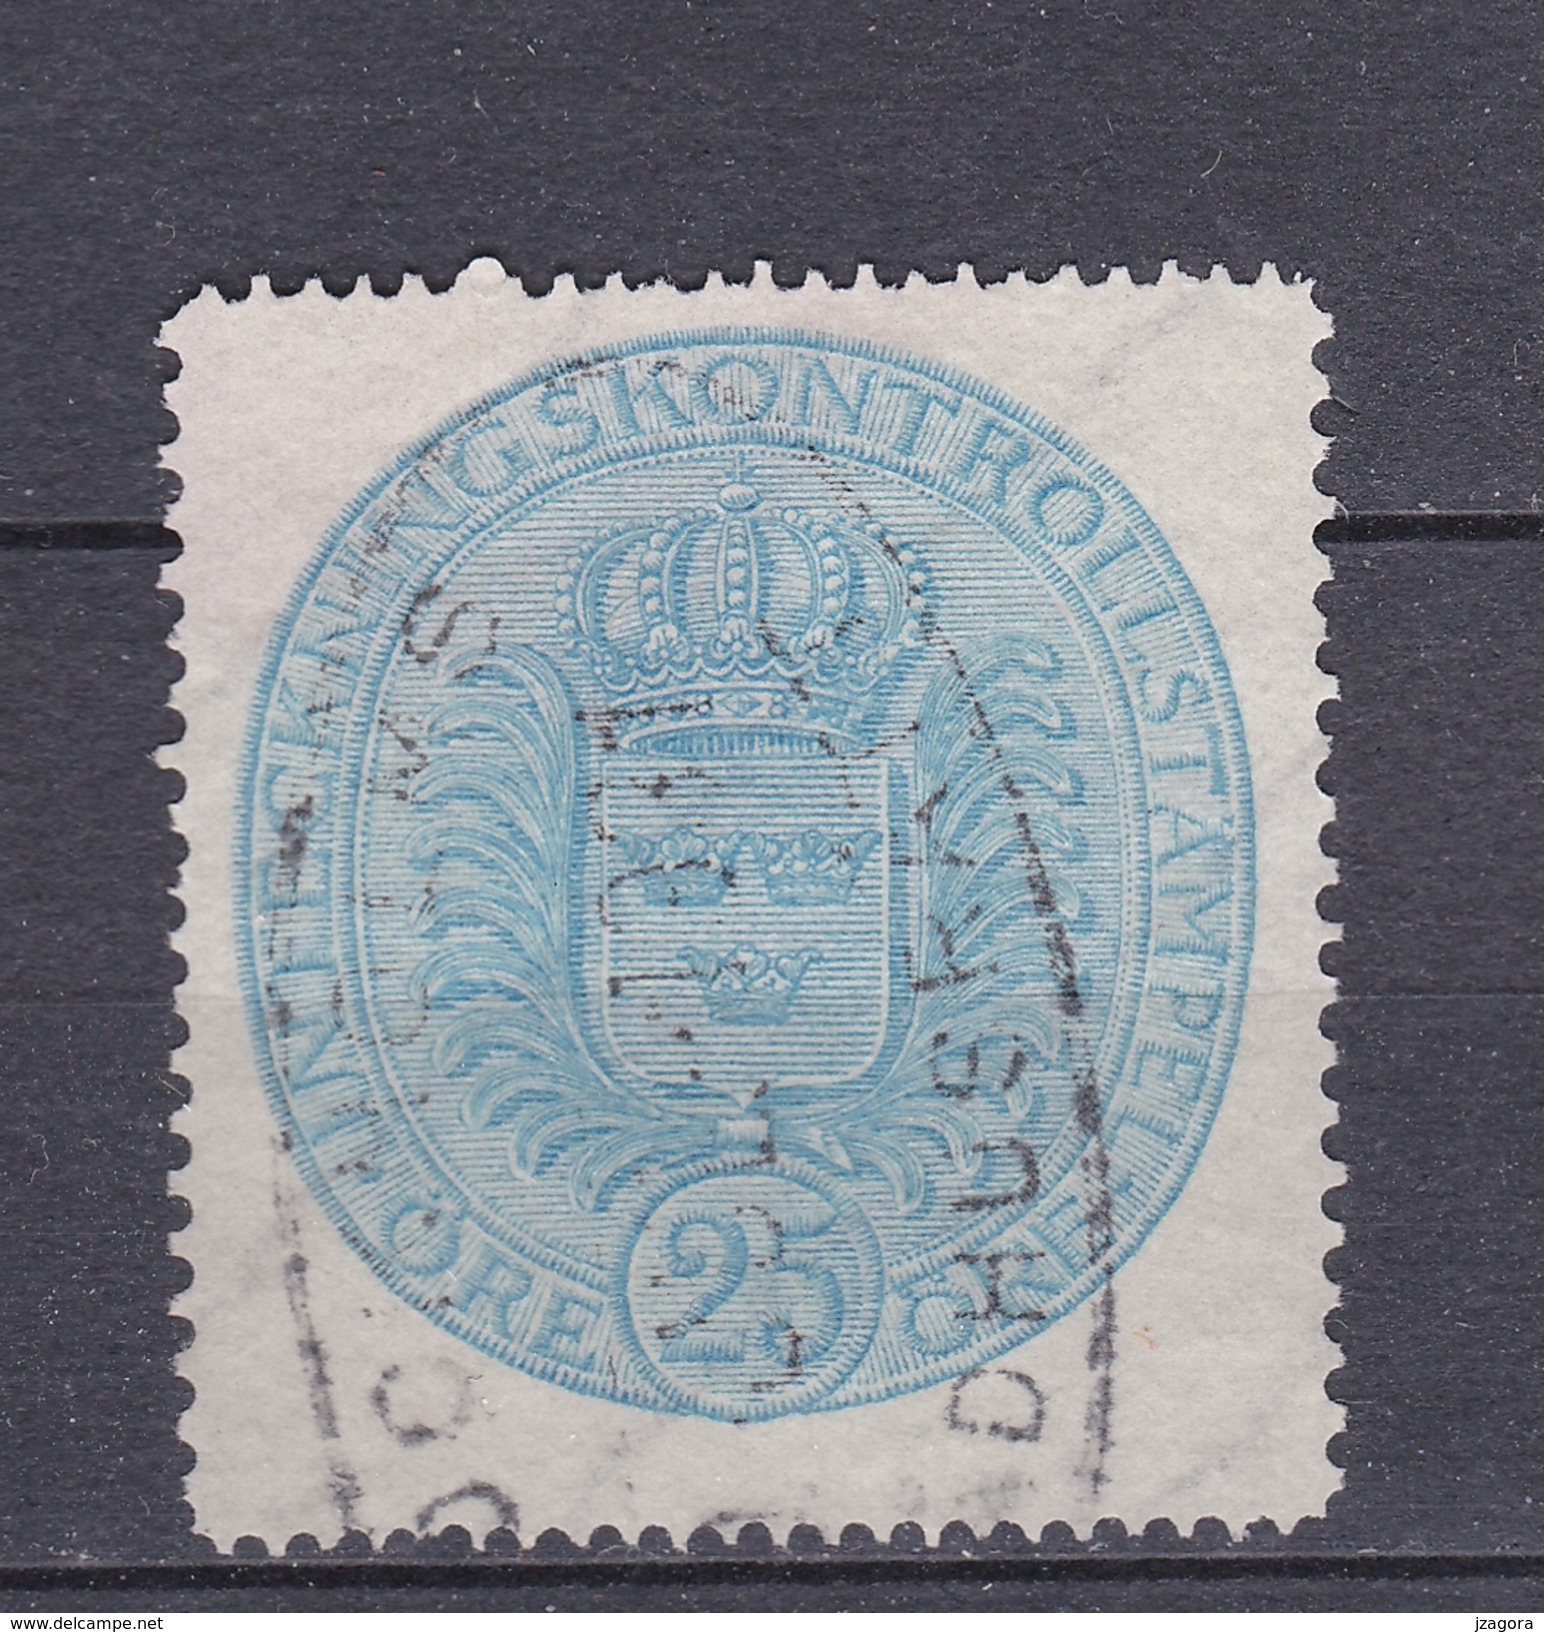 OLD REVENUE STAMP STEUERMARKE TIMBRE FISCAL  MORTGAGE CONTROLL - SWEDEN  -  25 ORE  HYPOTHEKEN HYPOTHÈQUES HIPOTECA - Fiscale Zegels